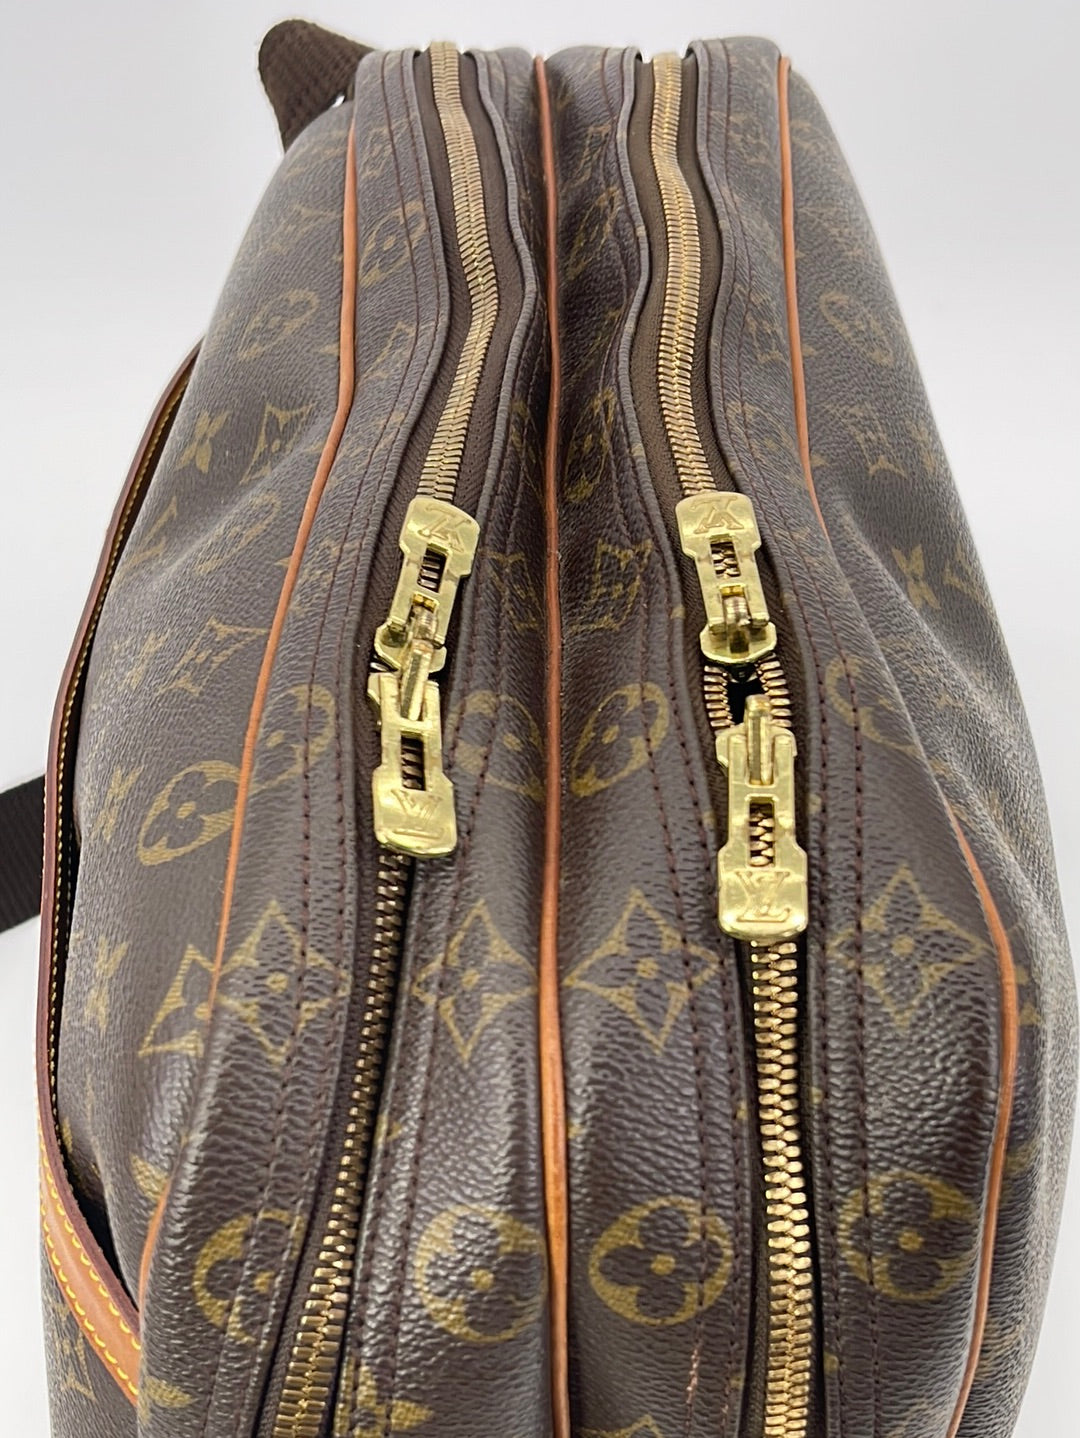 Shop for Louis Vuitton Monogram Canvas Leather Reporter GM Bag - Shipped  from USA